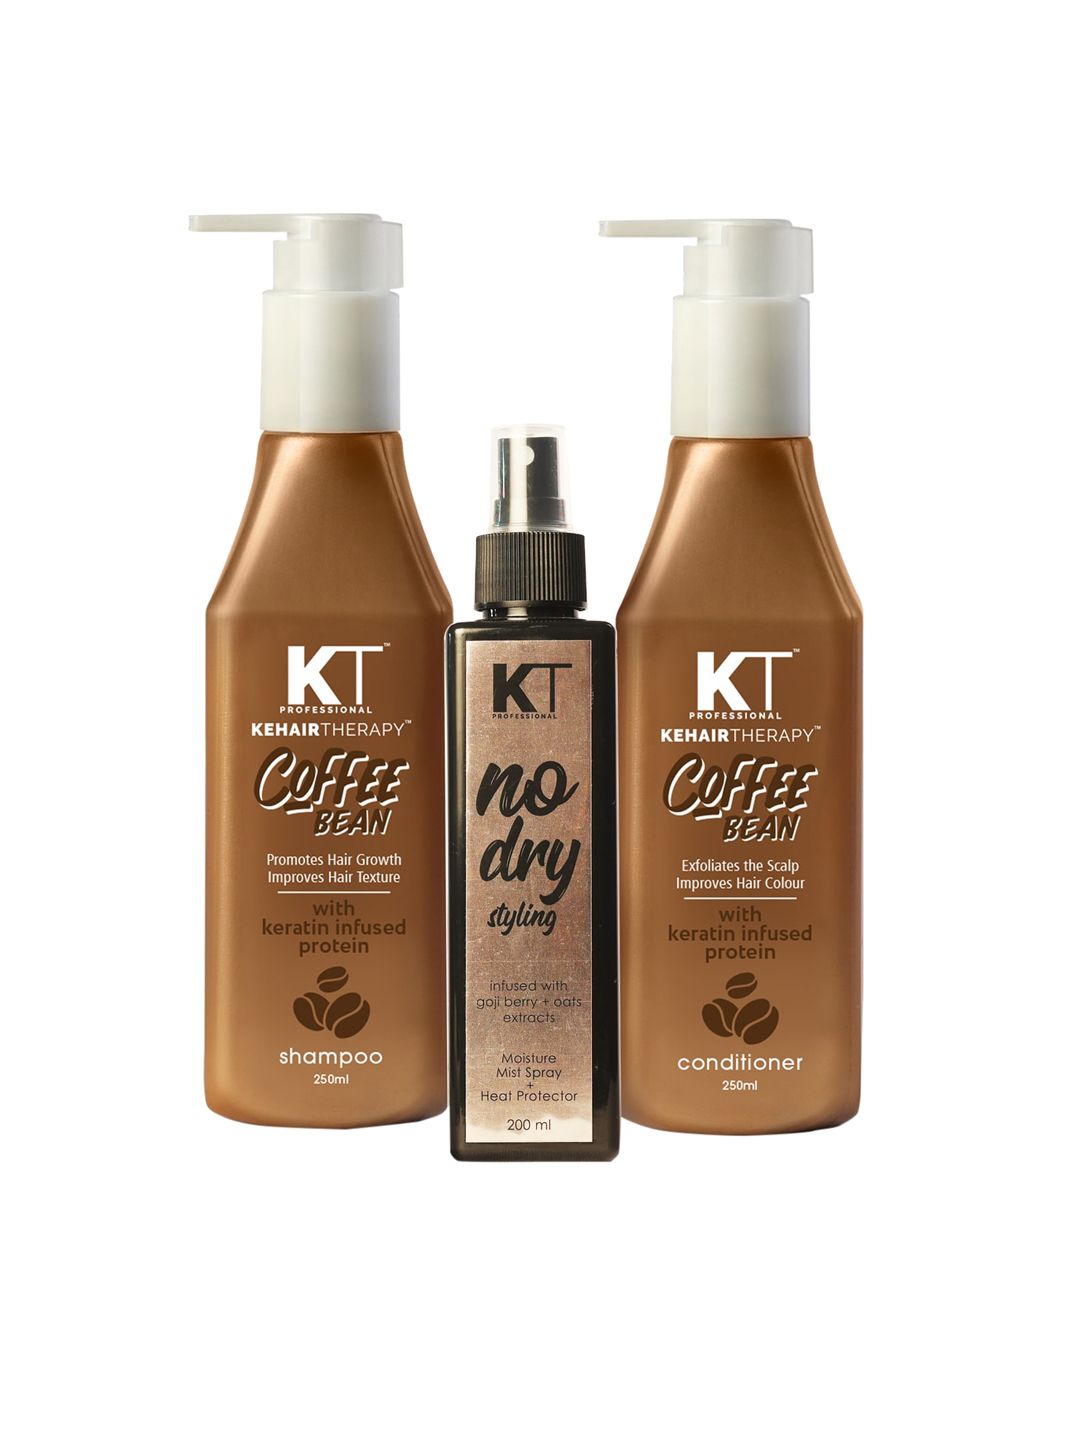 KEHAIRTHERAPY Pack Of 3 Coffee Bean Shampoo & Conditioner With No Dry Hair Spray Price in India